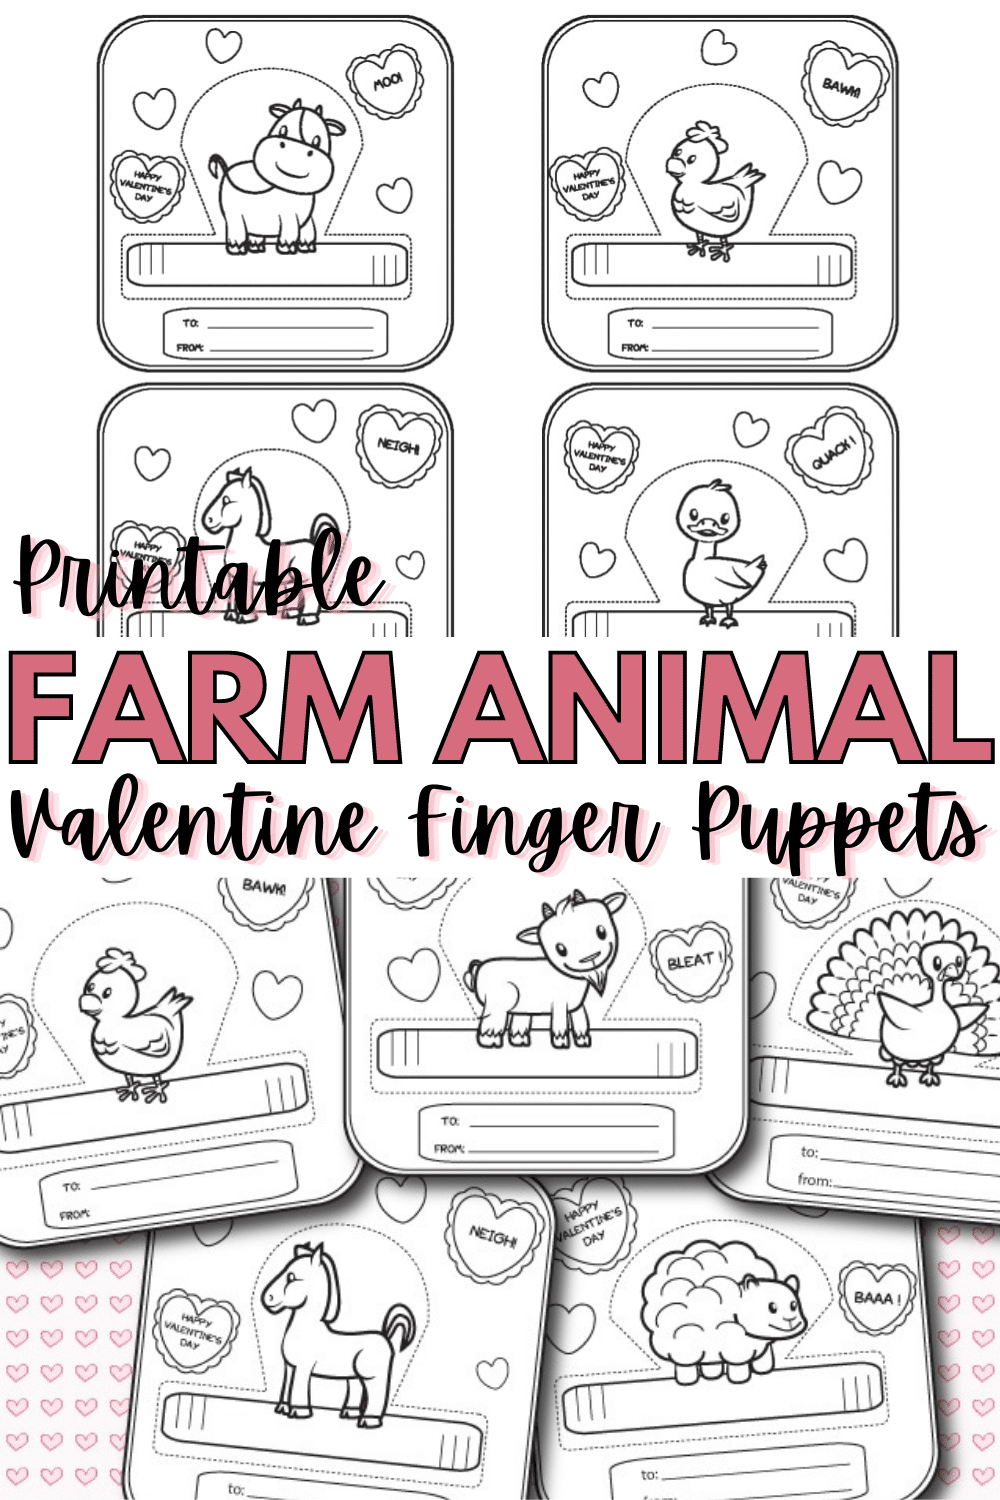 These farm animal Valentine finger puppets are adorable and so much fun for kids to decorate and play with! #printable #Valentines via @wondermomwannab